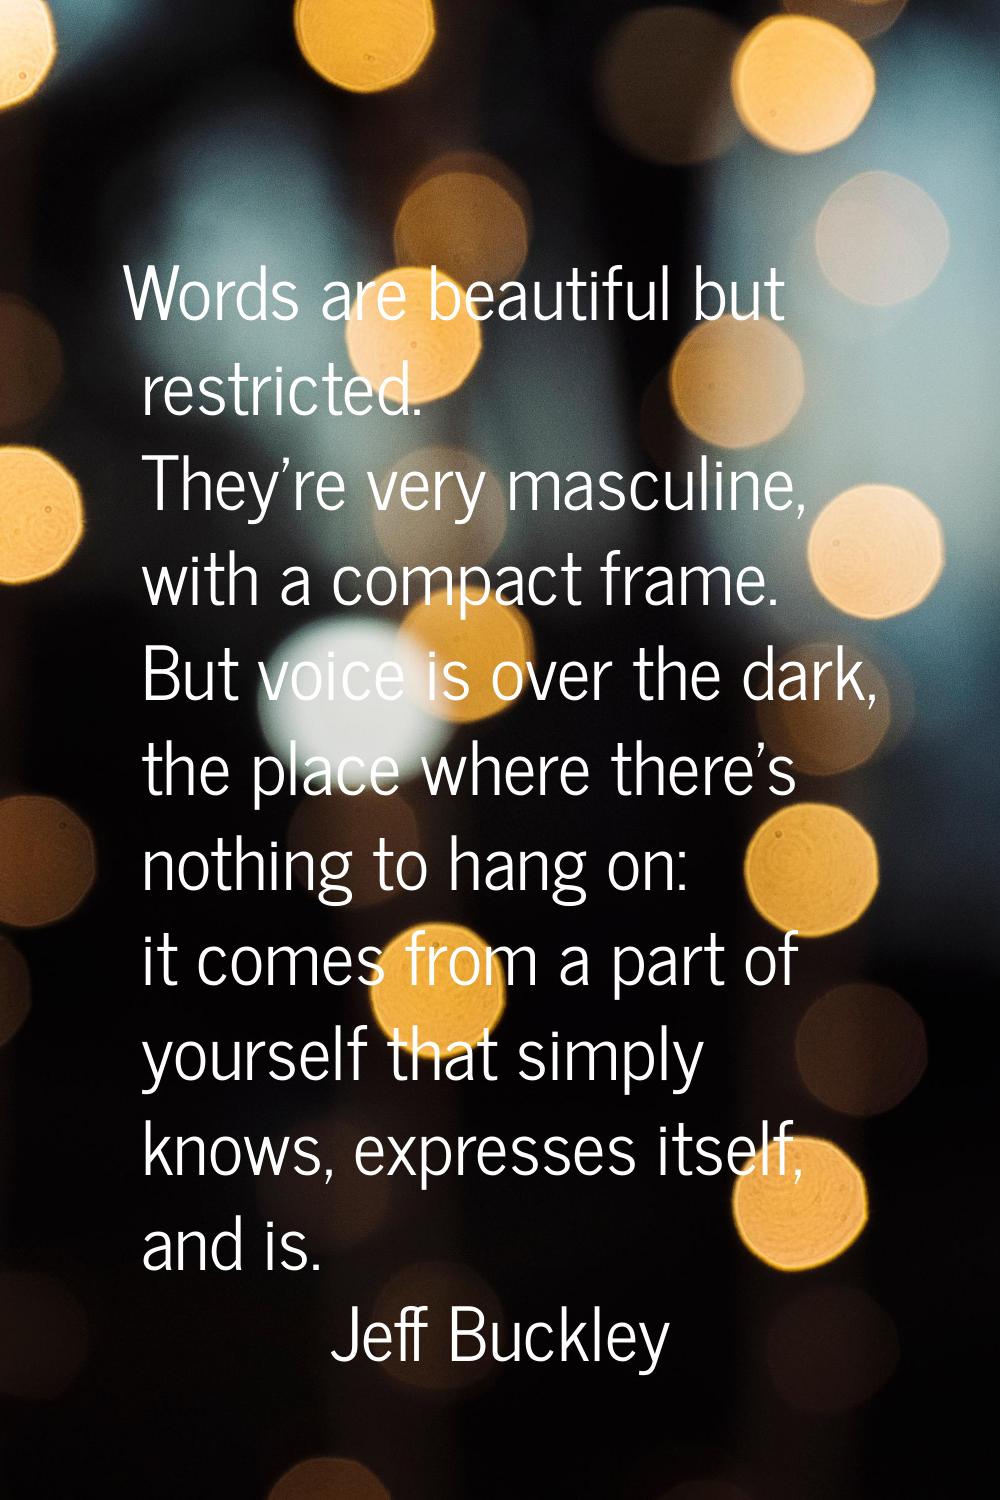 Words are beautiful but restricted. They're very masculine, with a compact frame. But voice is over